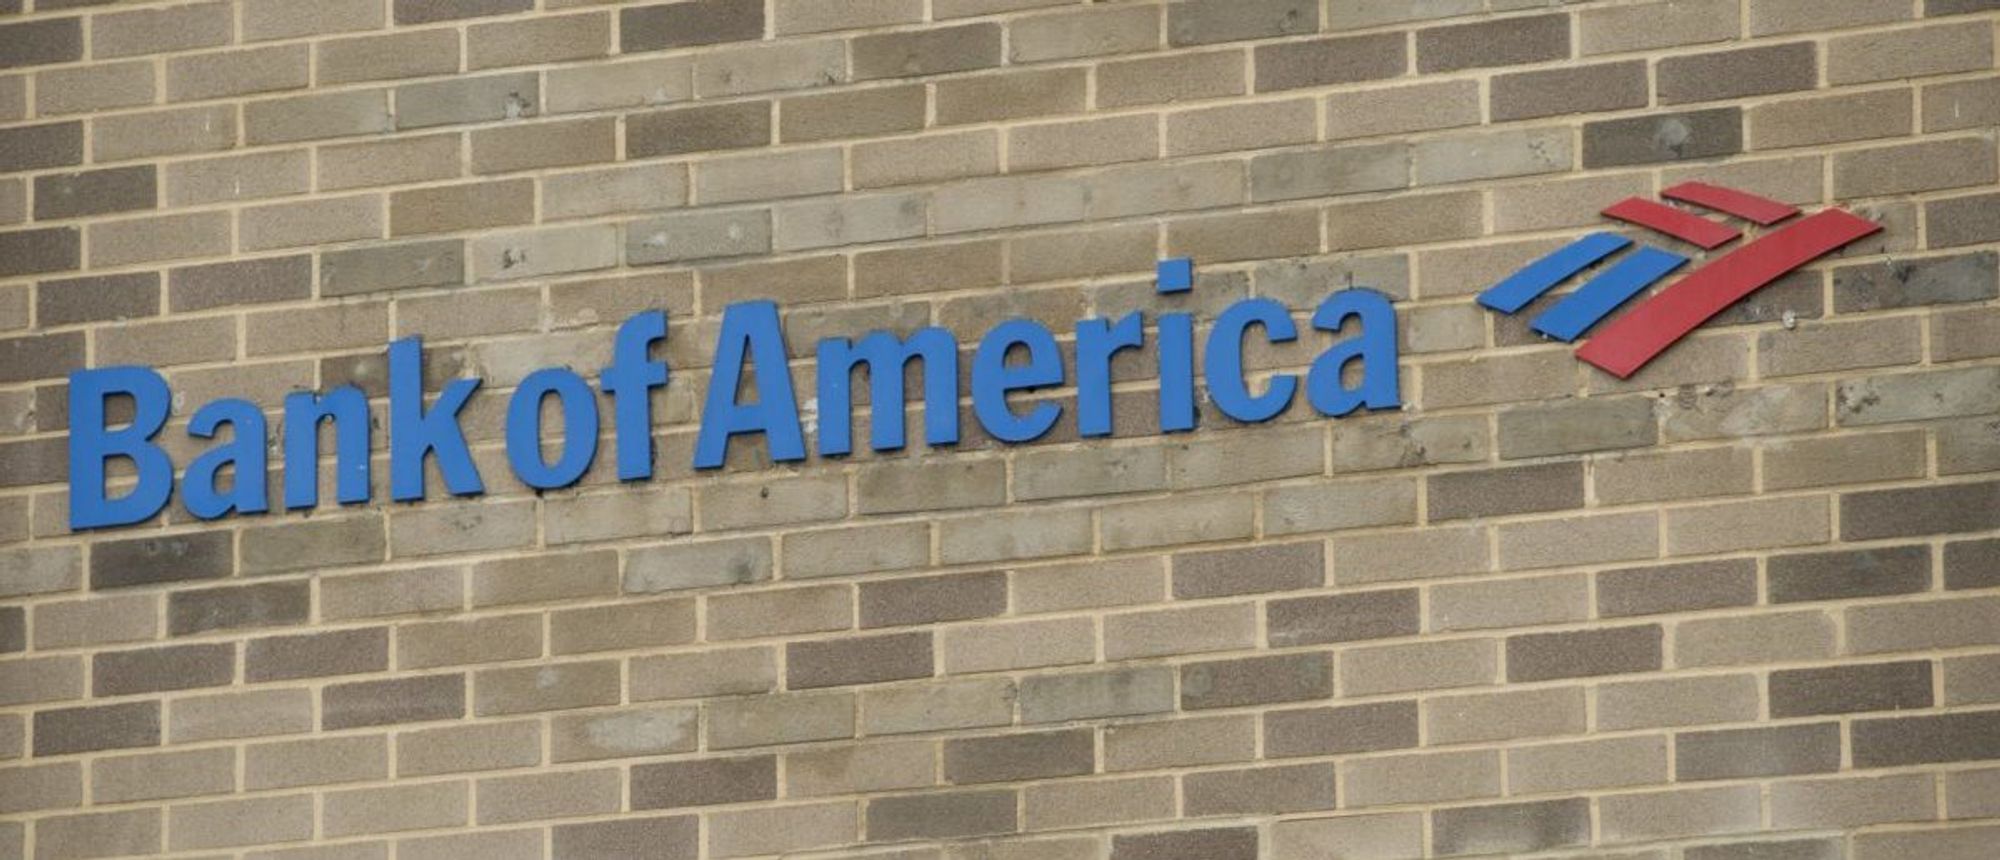 GOP-Led Committee Subpoenas Bank Of America Over Providing Personal Account Details To FBI Related To January 6